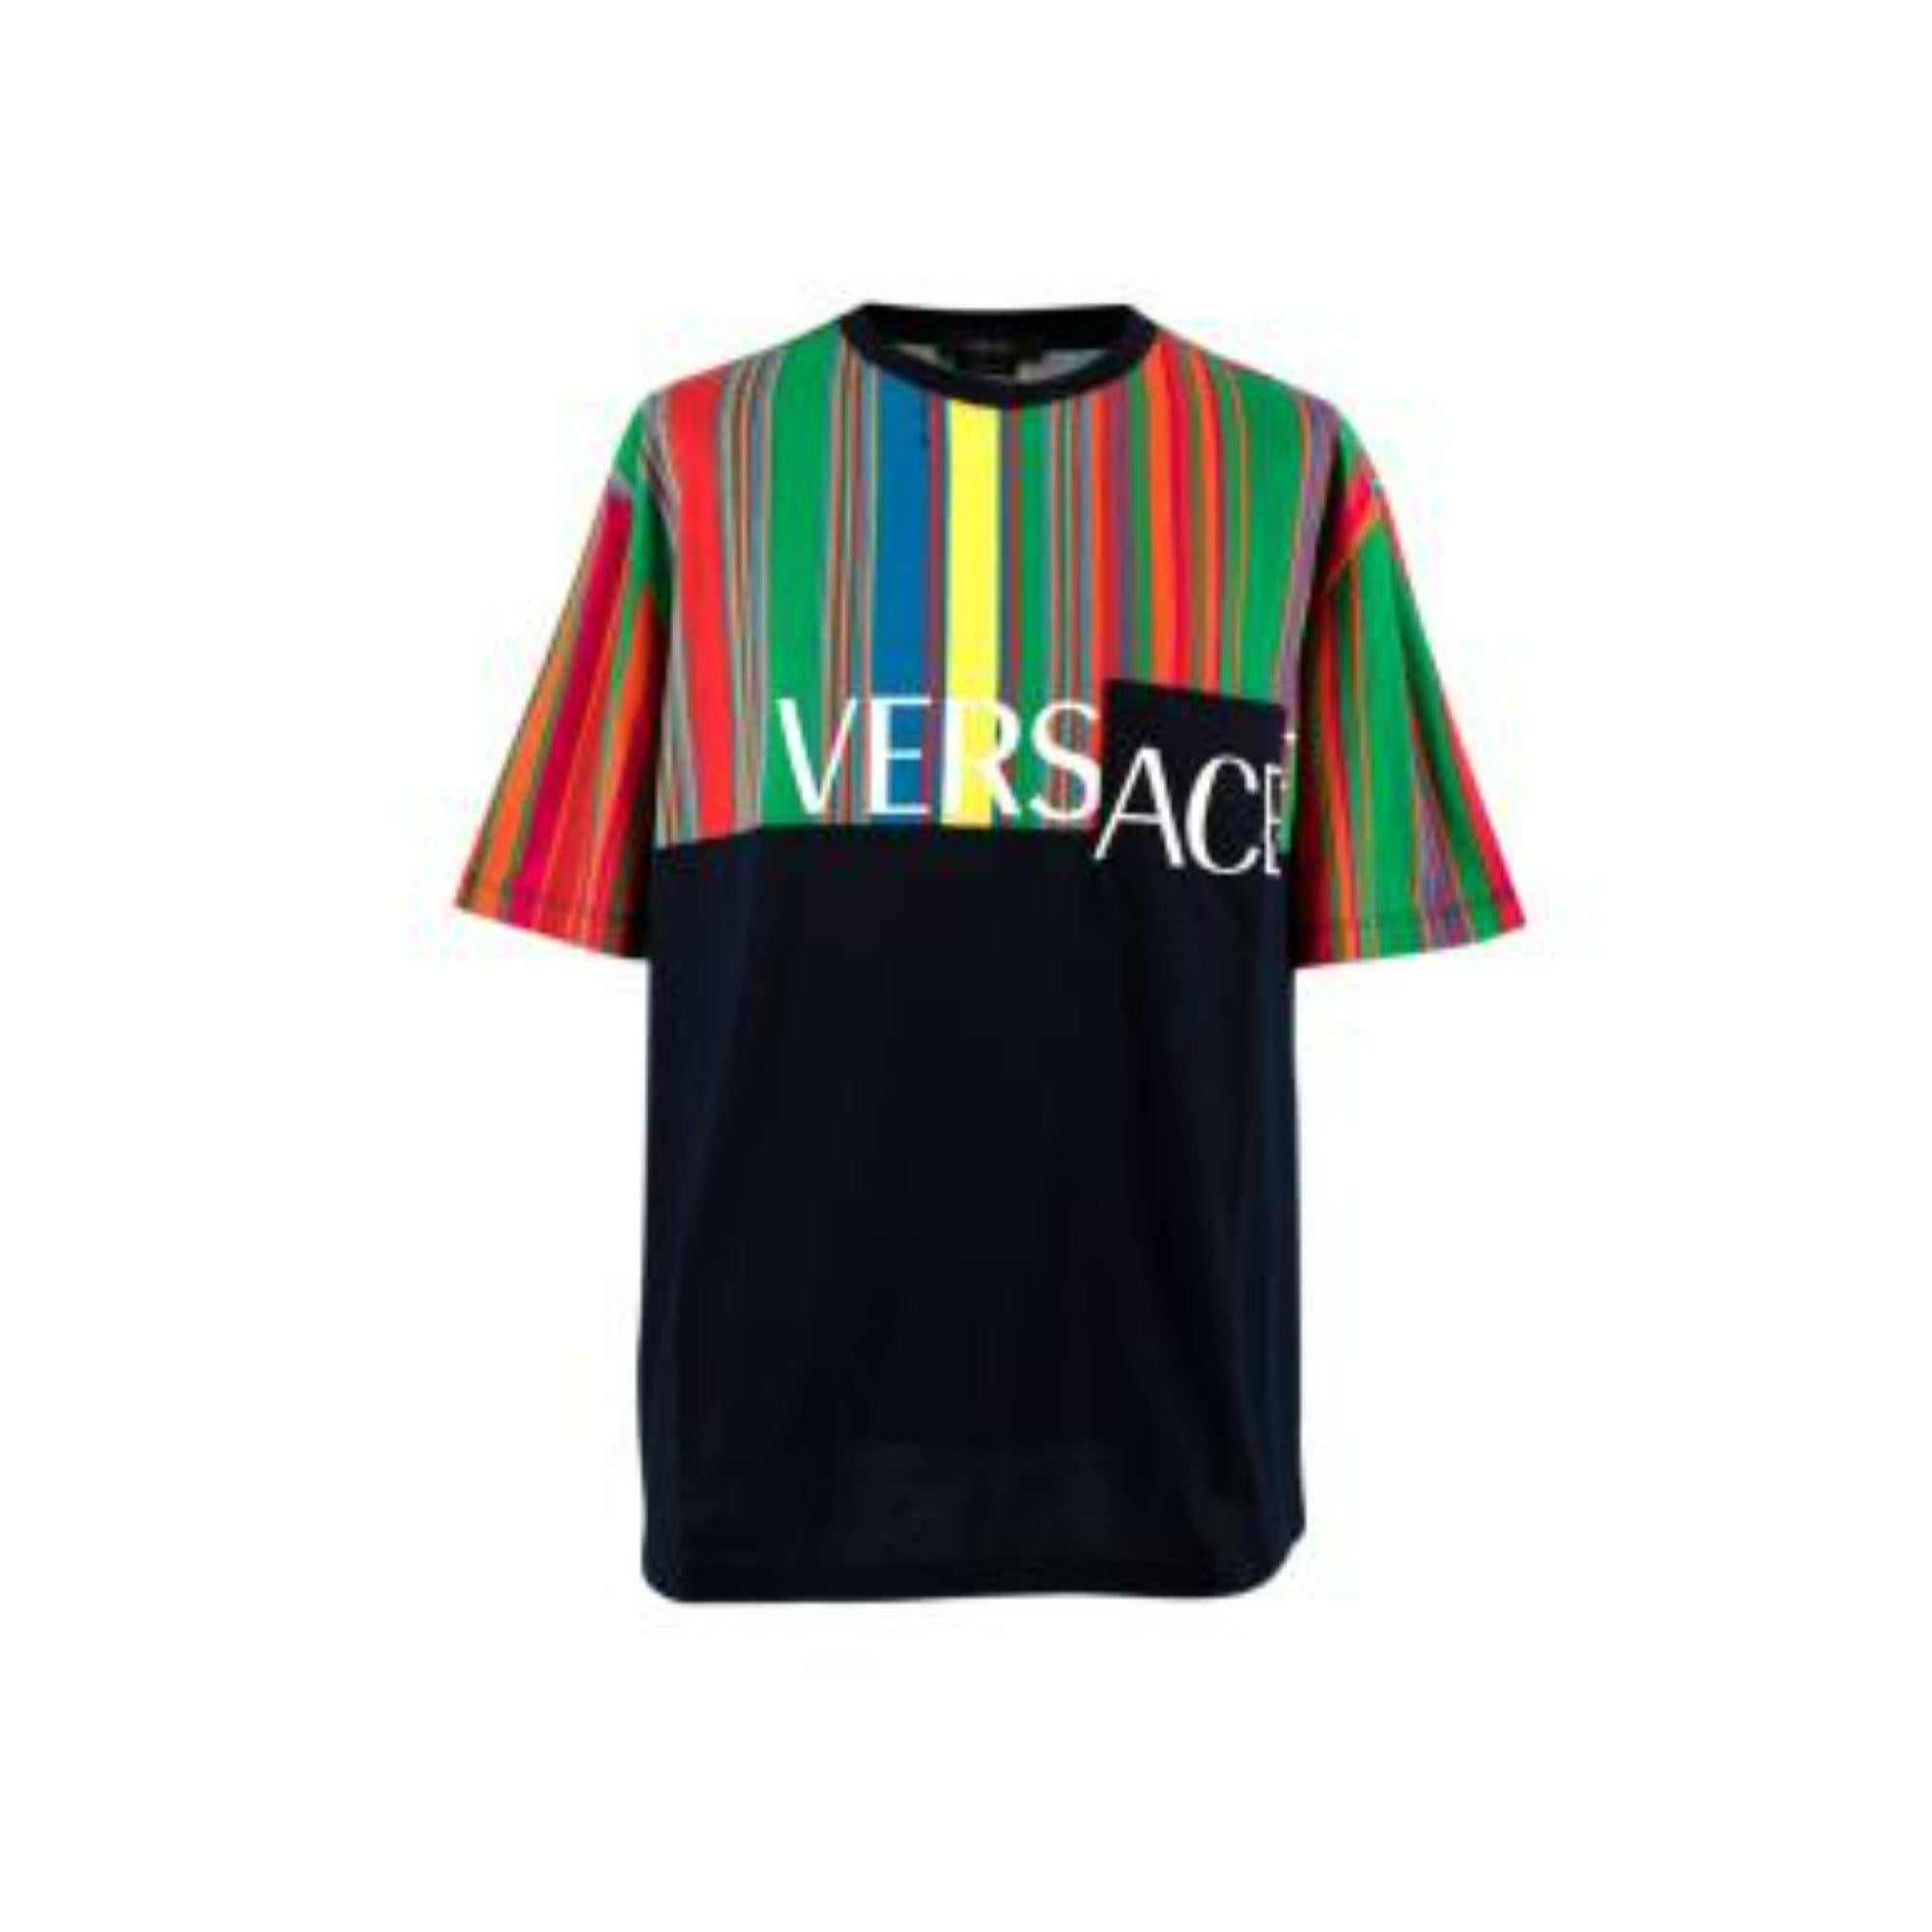 Versace Rainbow Panelled Oversize T-shirt

- Round ribbed neckline 
-Multi colour striped panel 
-Logo print 
-Chest pocket 
-Relaxed fit 

Material: 

100% Cotton 

Made in Italy 

PLEASE NOTE, THESE ITEMS ARE PRE-OWNED AND MAY SHOW SIGNS OF BEING